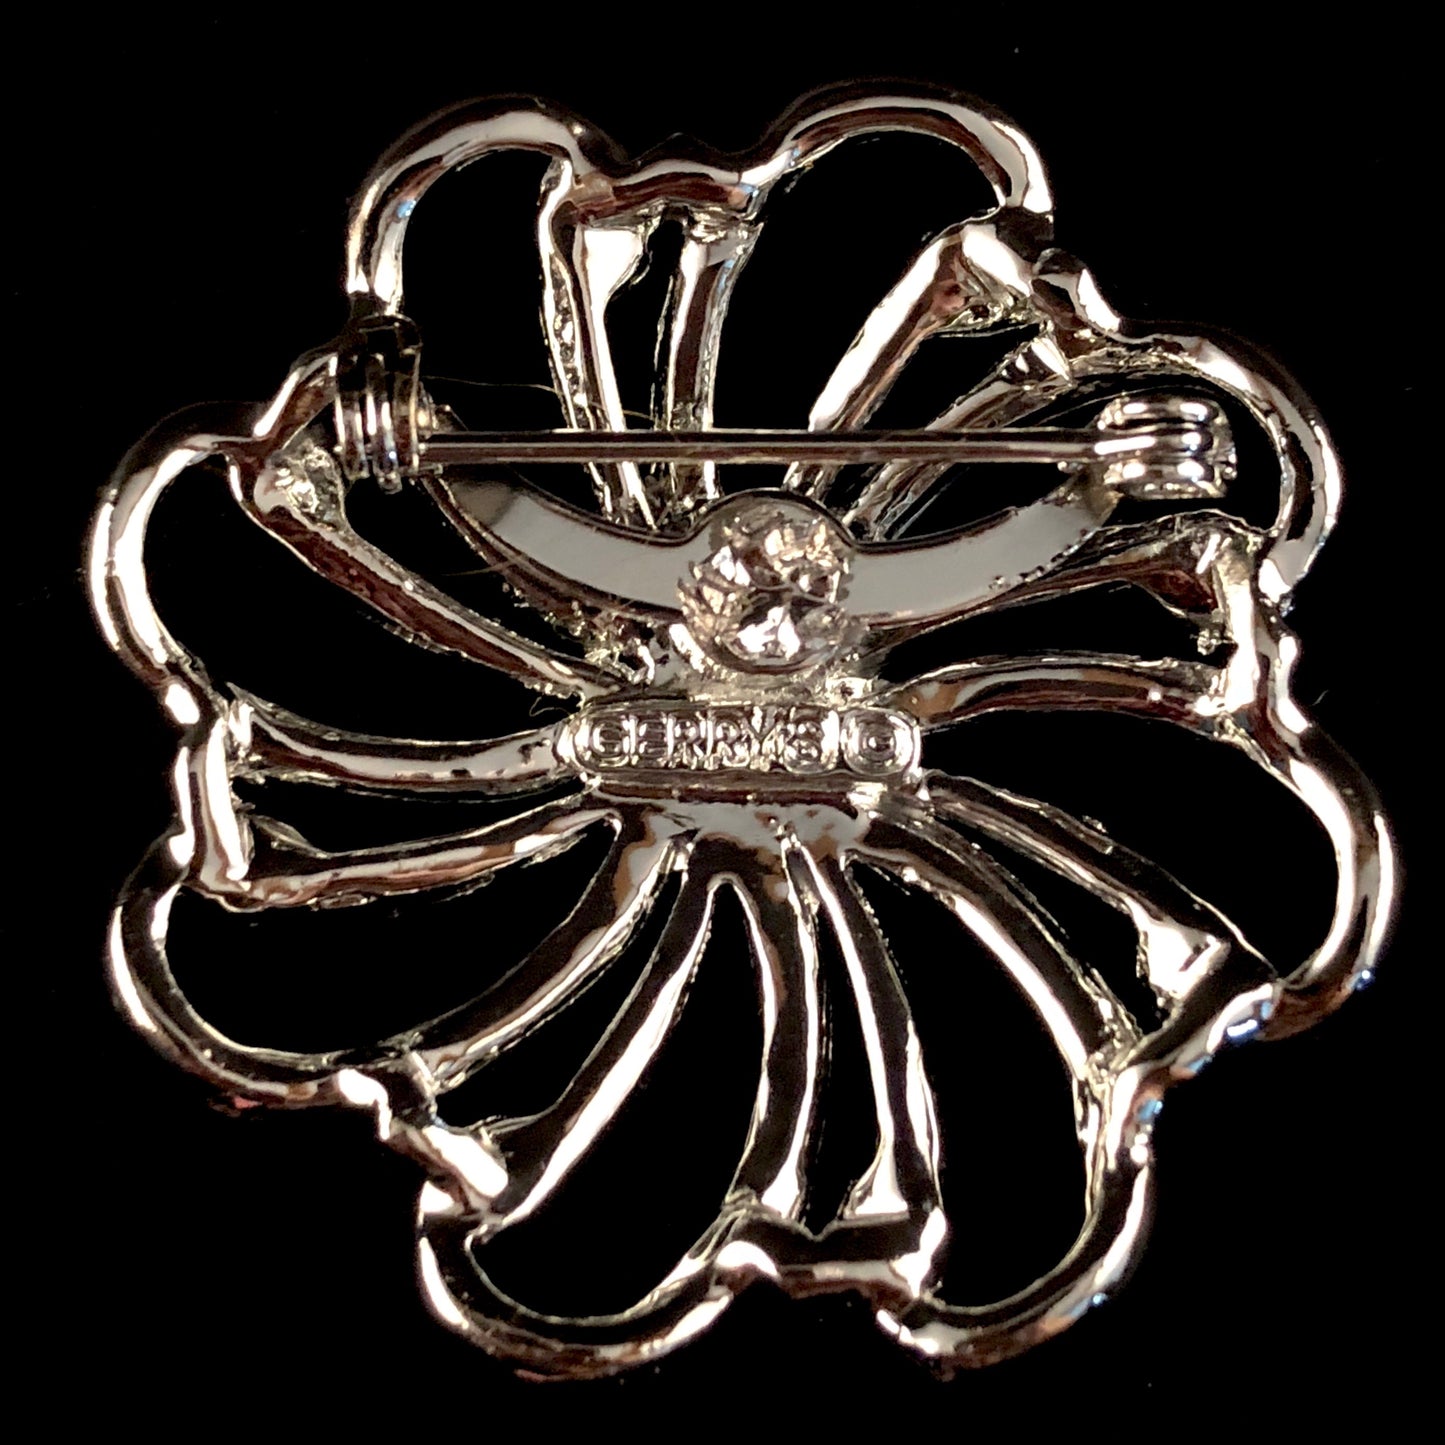 1960s Gerry’s Floral Abstract Brooch - Retro Kandy Vintage